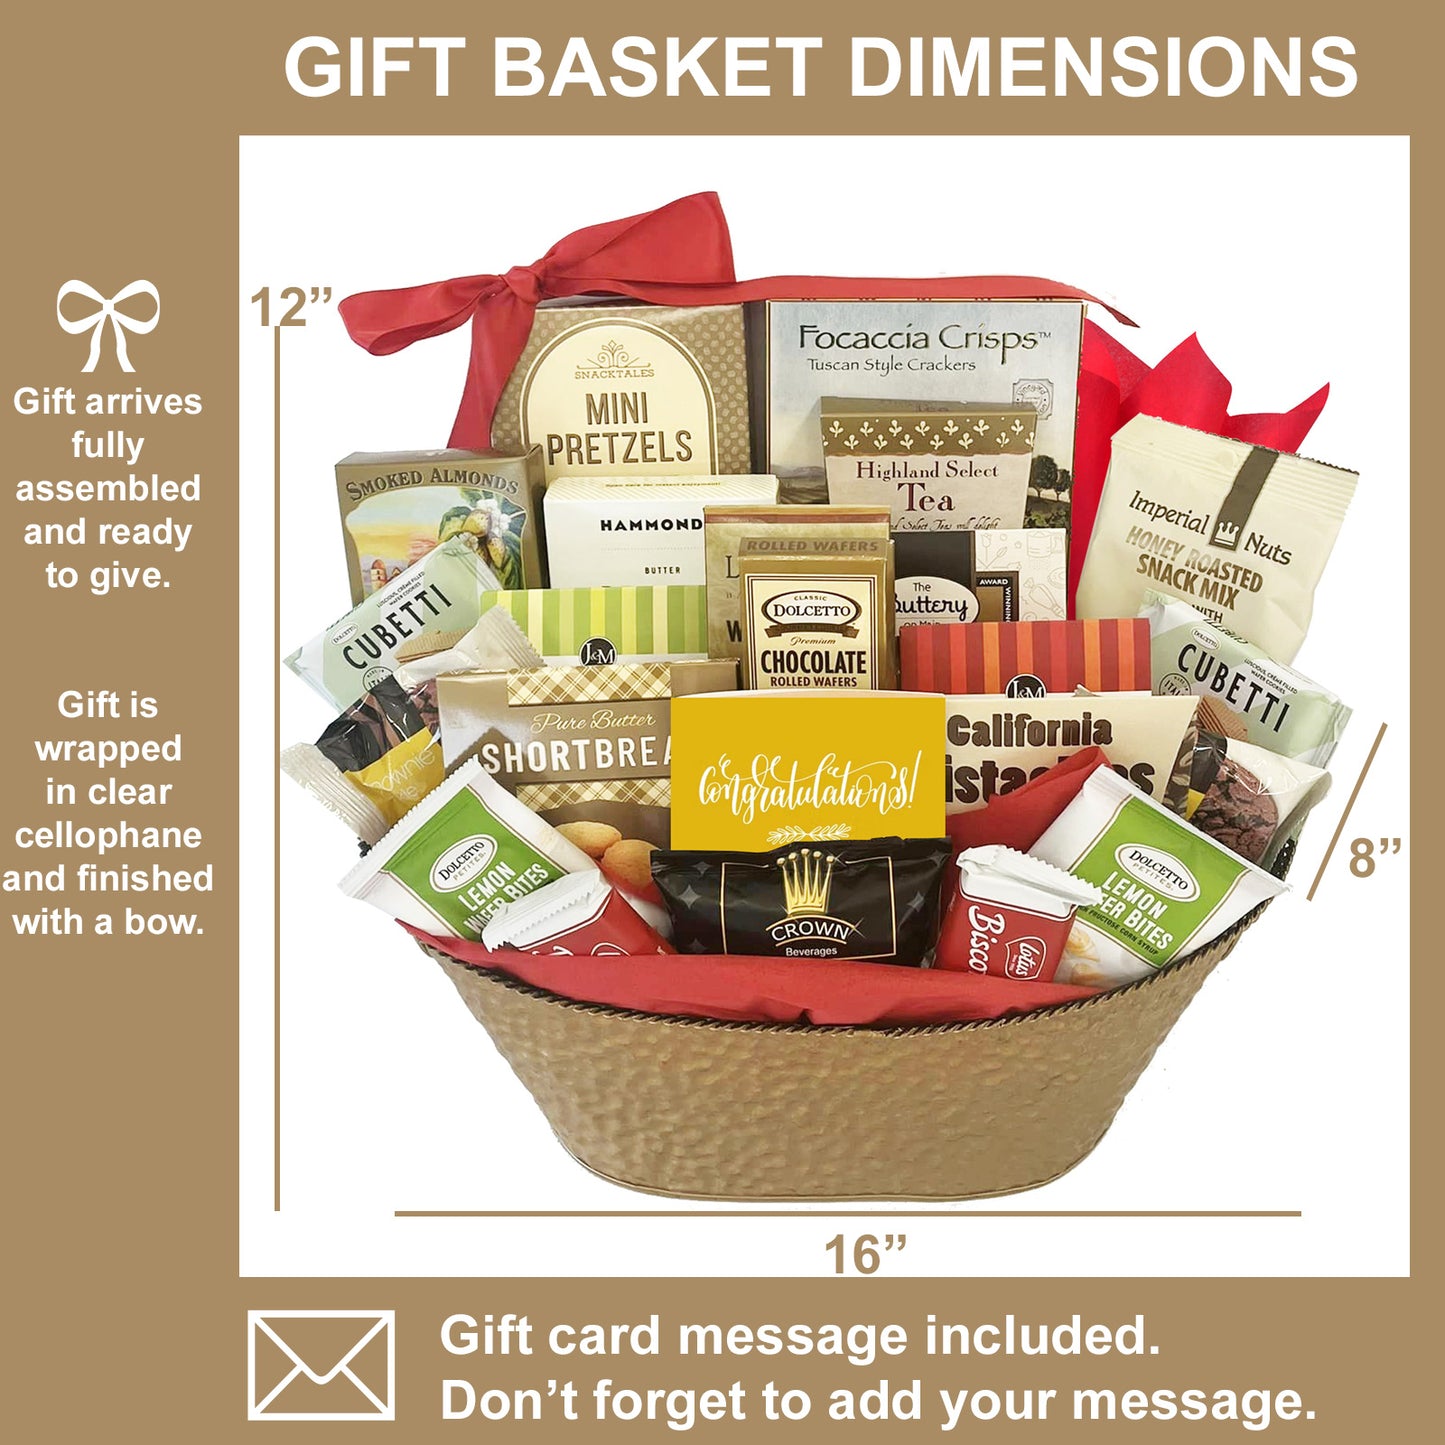 Grand Gourmet Congratulations Gift Basket for Men, Women, Friends, Family, Business Includes Congratulations Card and Personal Note